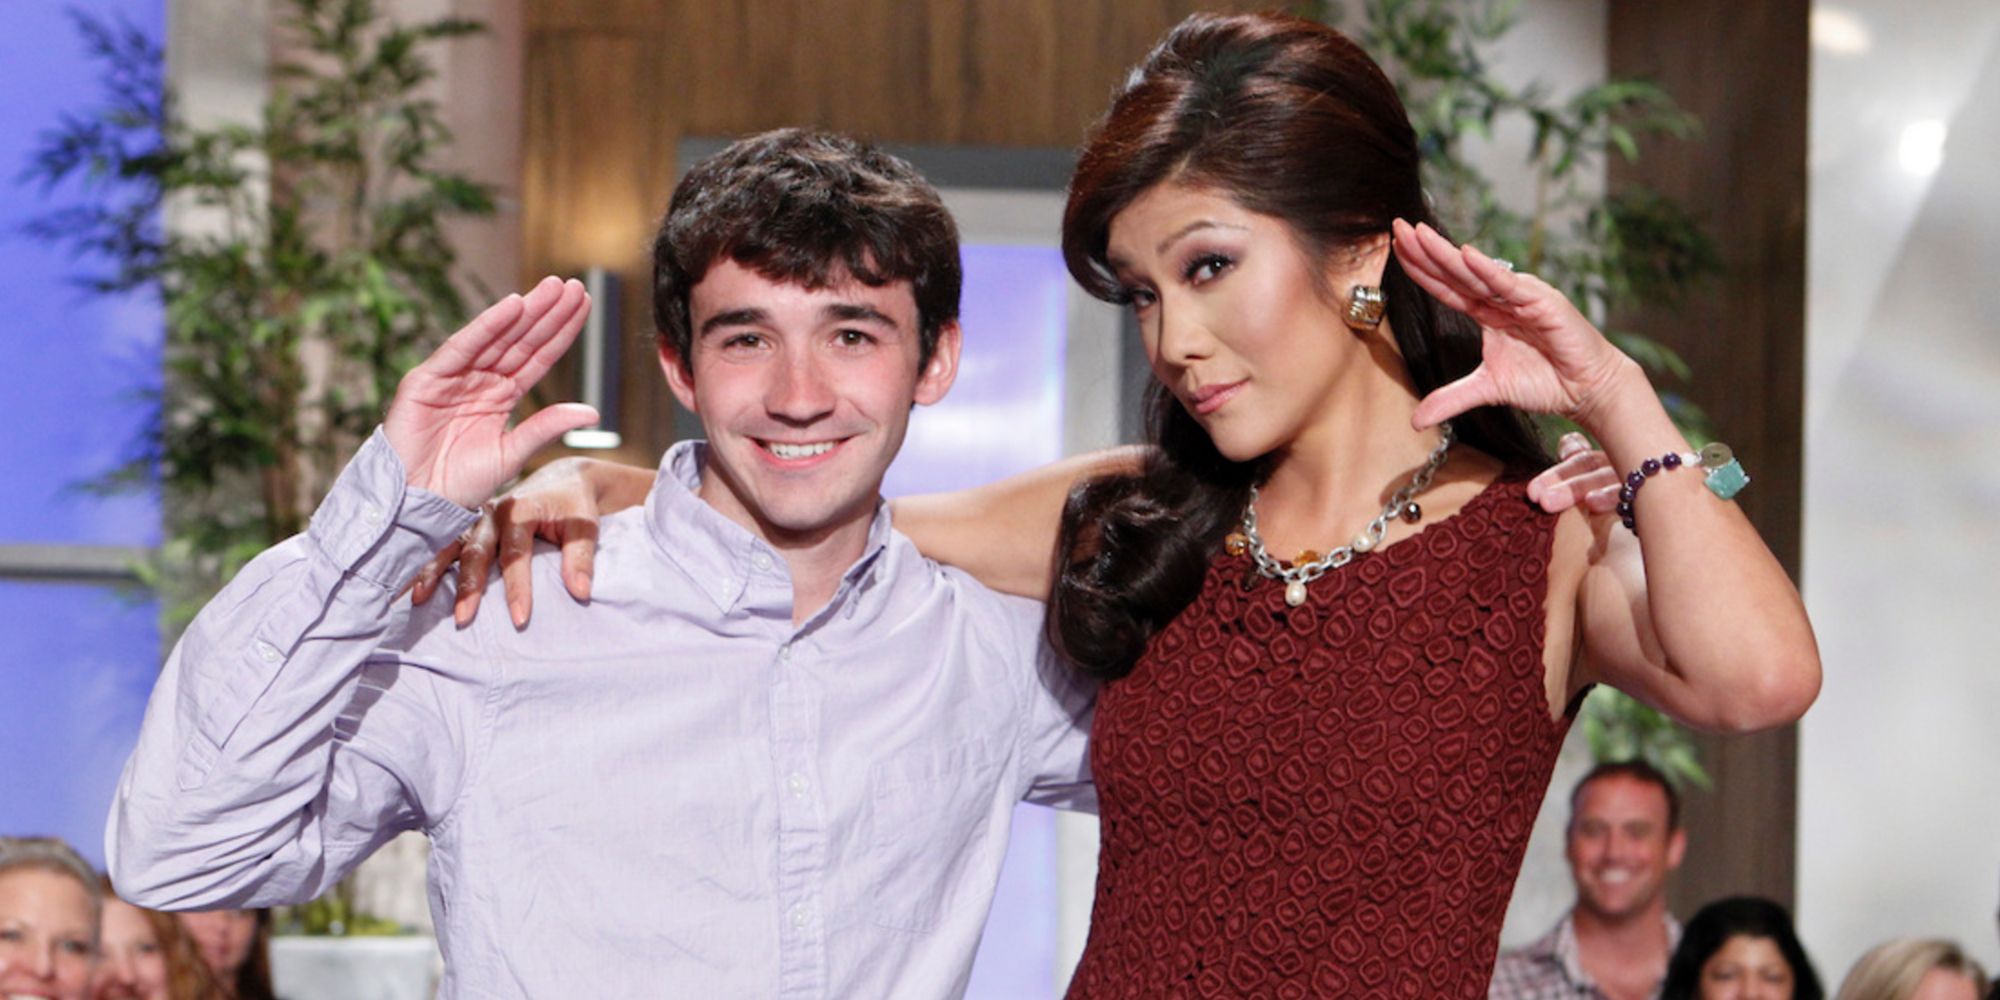 Ian Terry and Julie Chen on Big Brother 14 posing with their hands up